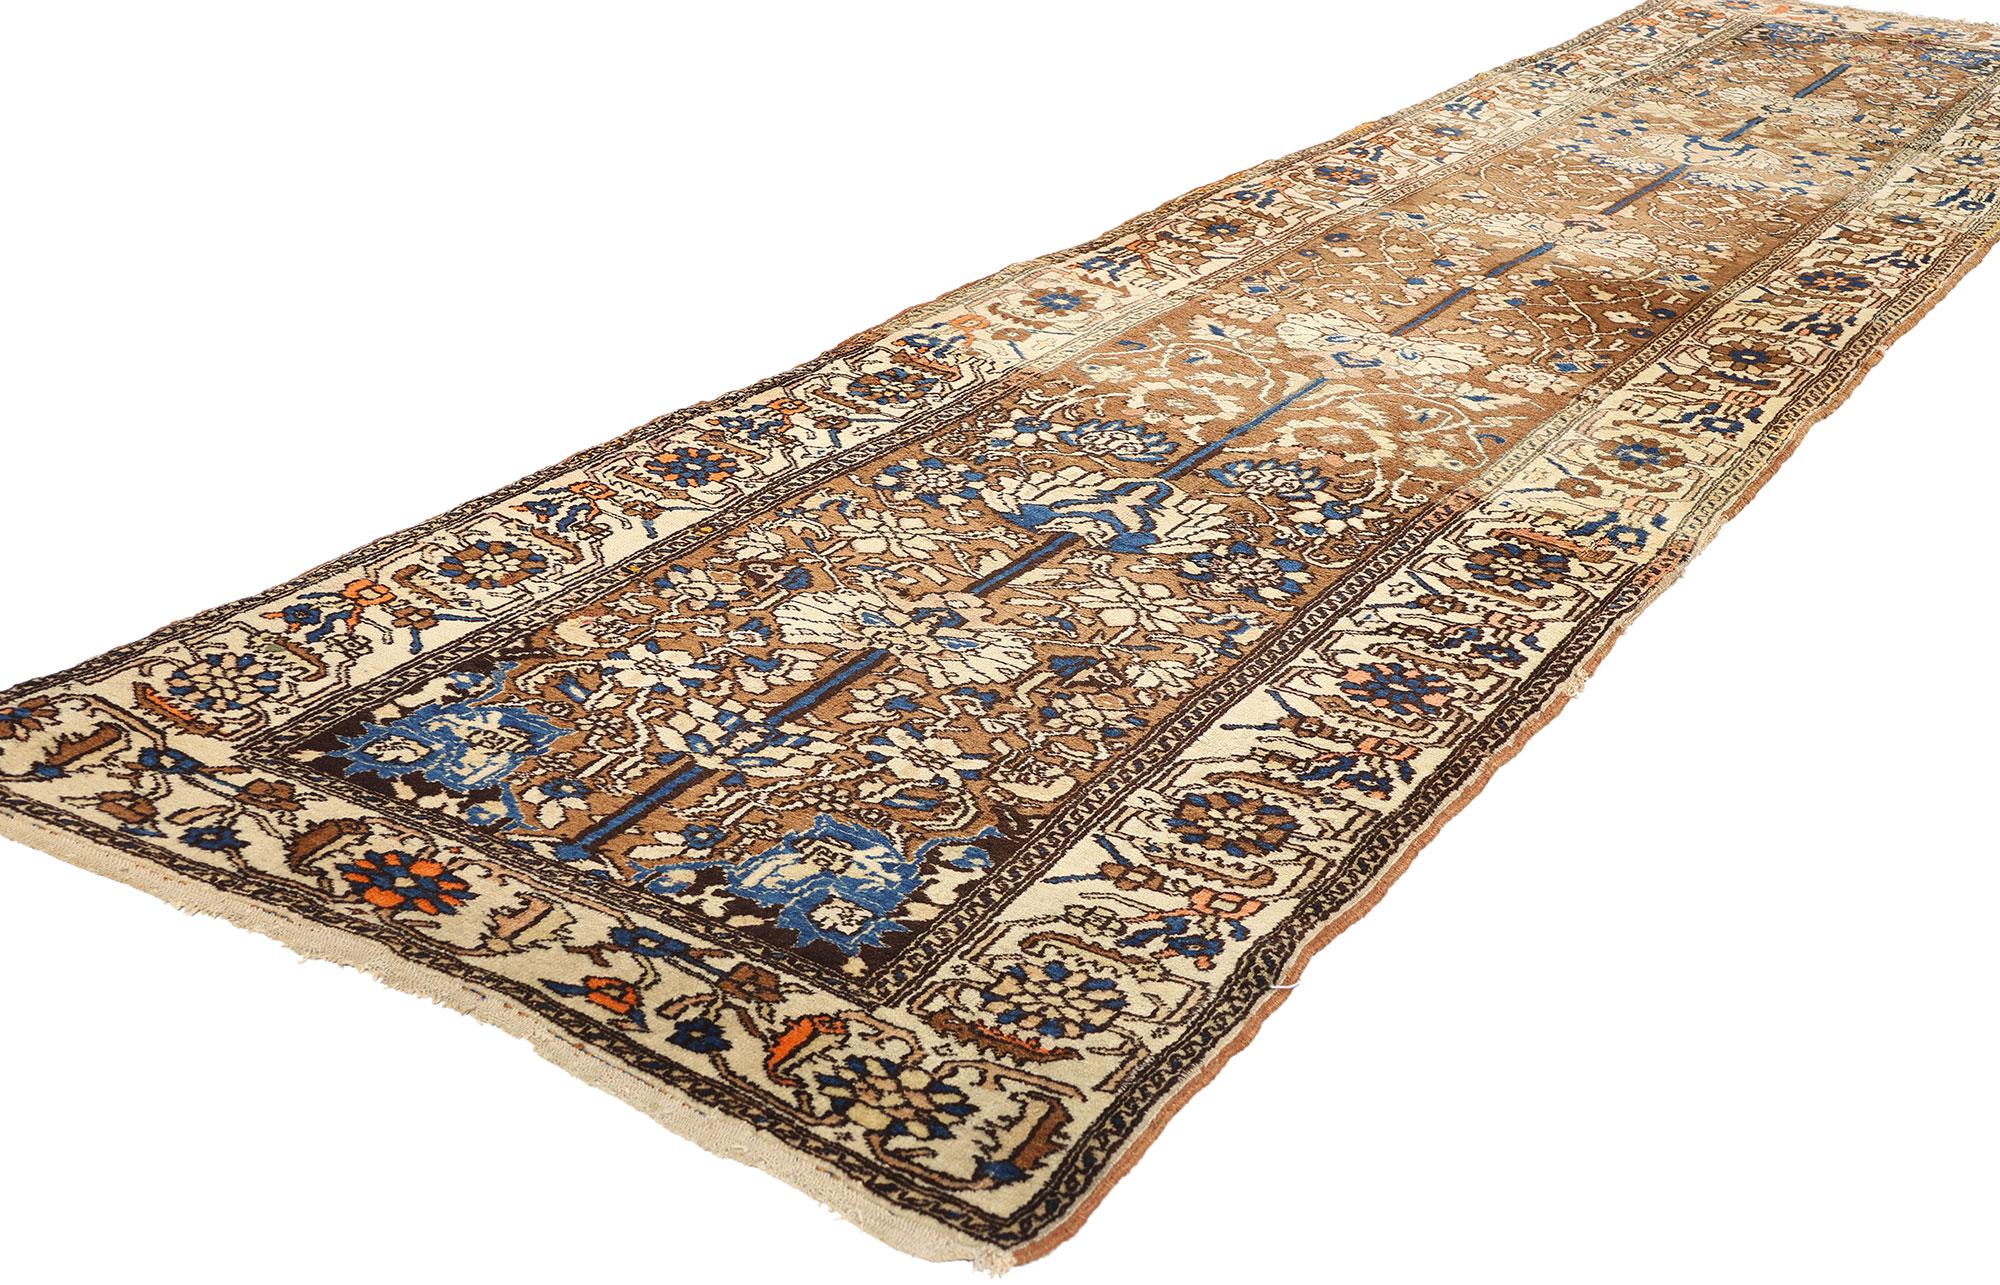 70741 Antique Persian Malayer Rug Runner, 02'10 X 11'10. Antique Persian Malayer runners are long, narrow hand-knotted wool rugs originating from Malayer, Iran, prized for their age, intricate designs, and exceptional craftsmanship. These historical